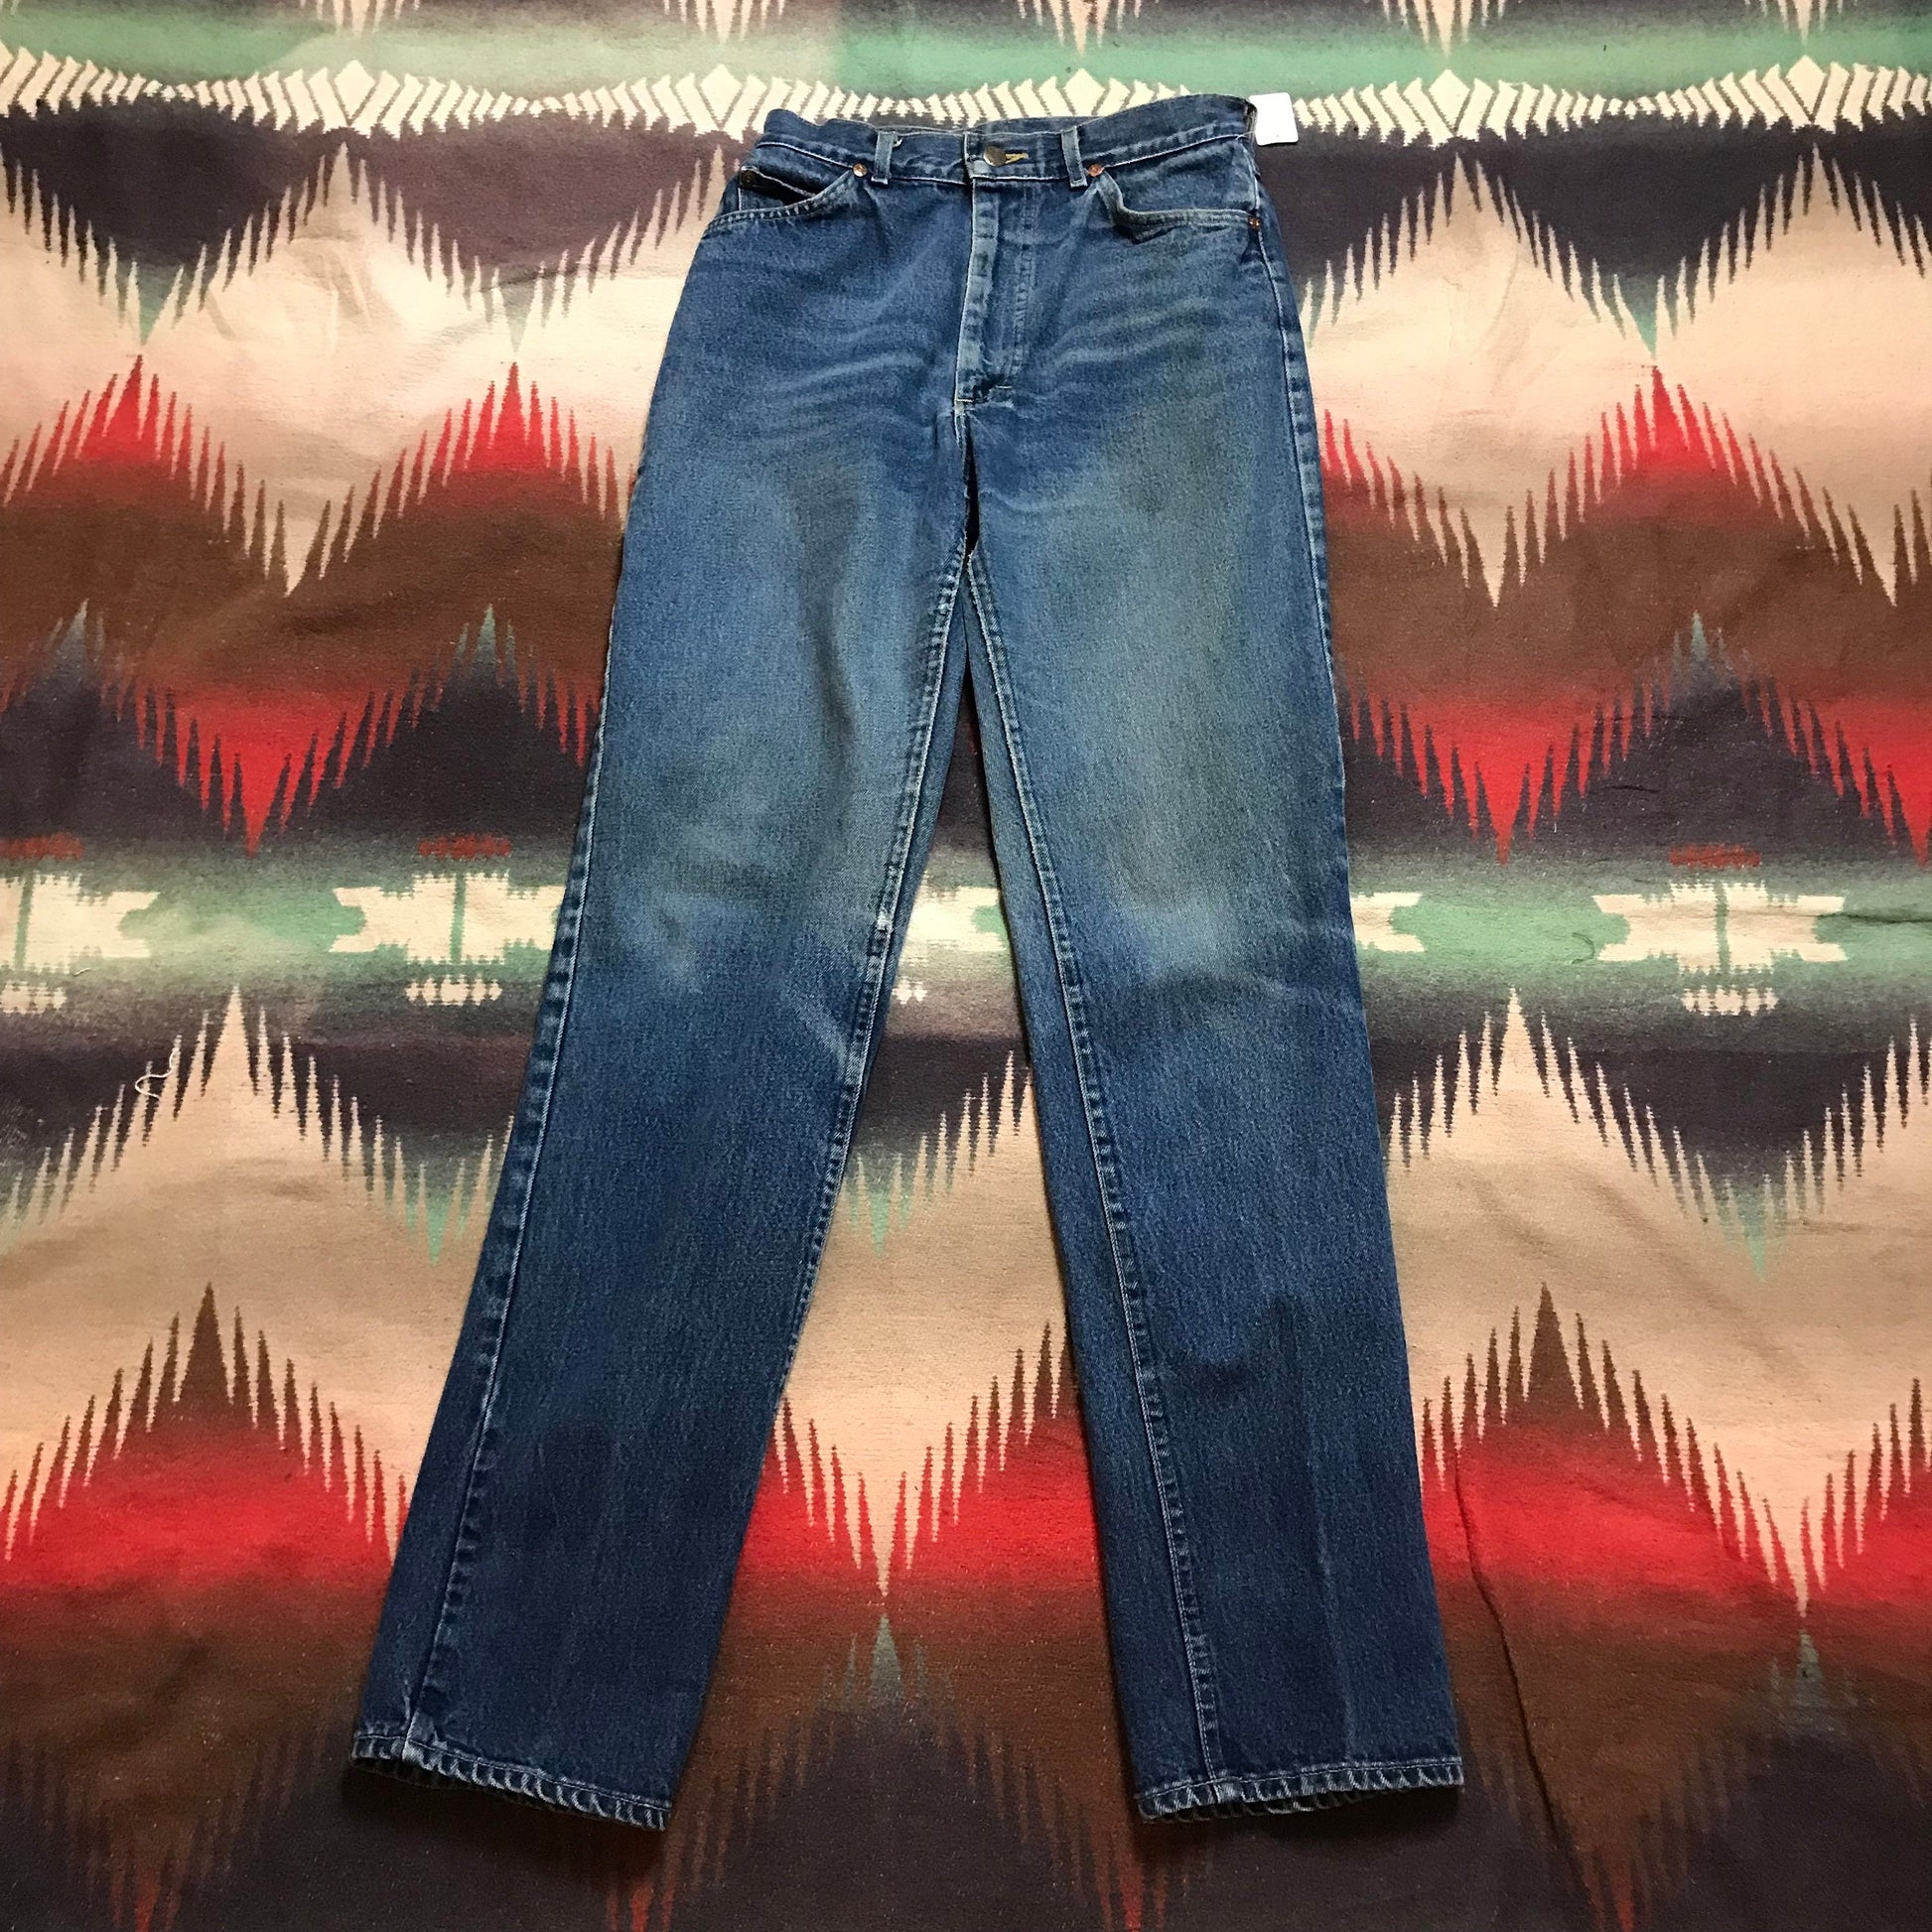 1970s Lee Riders Denim Jeans Made in USA Size 26x32.5